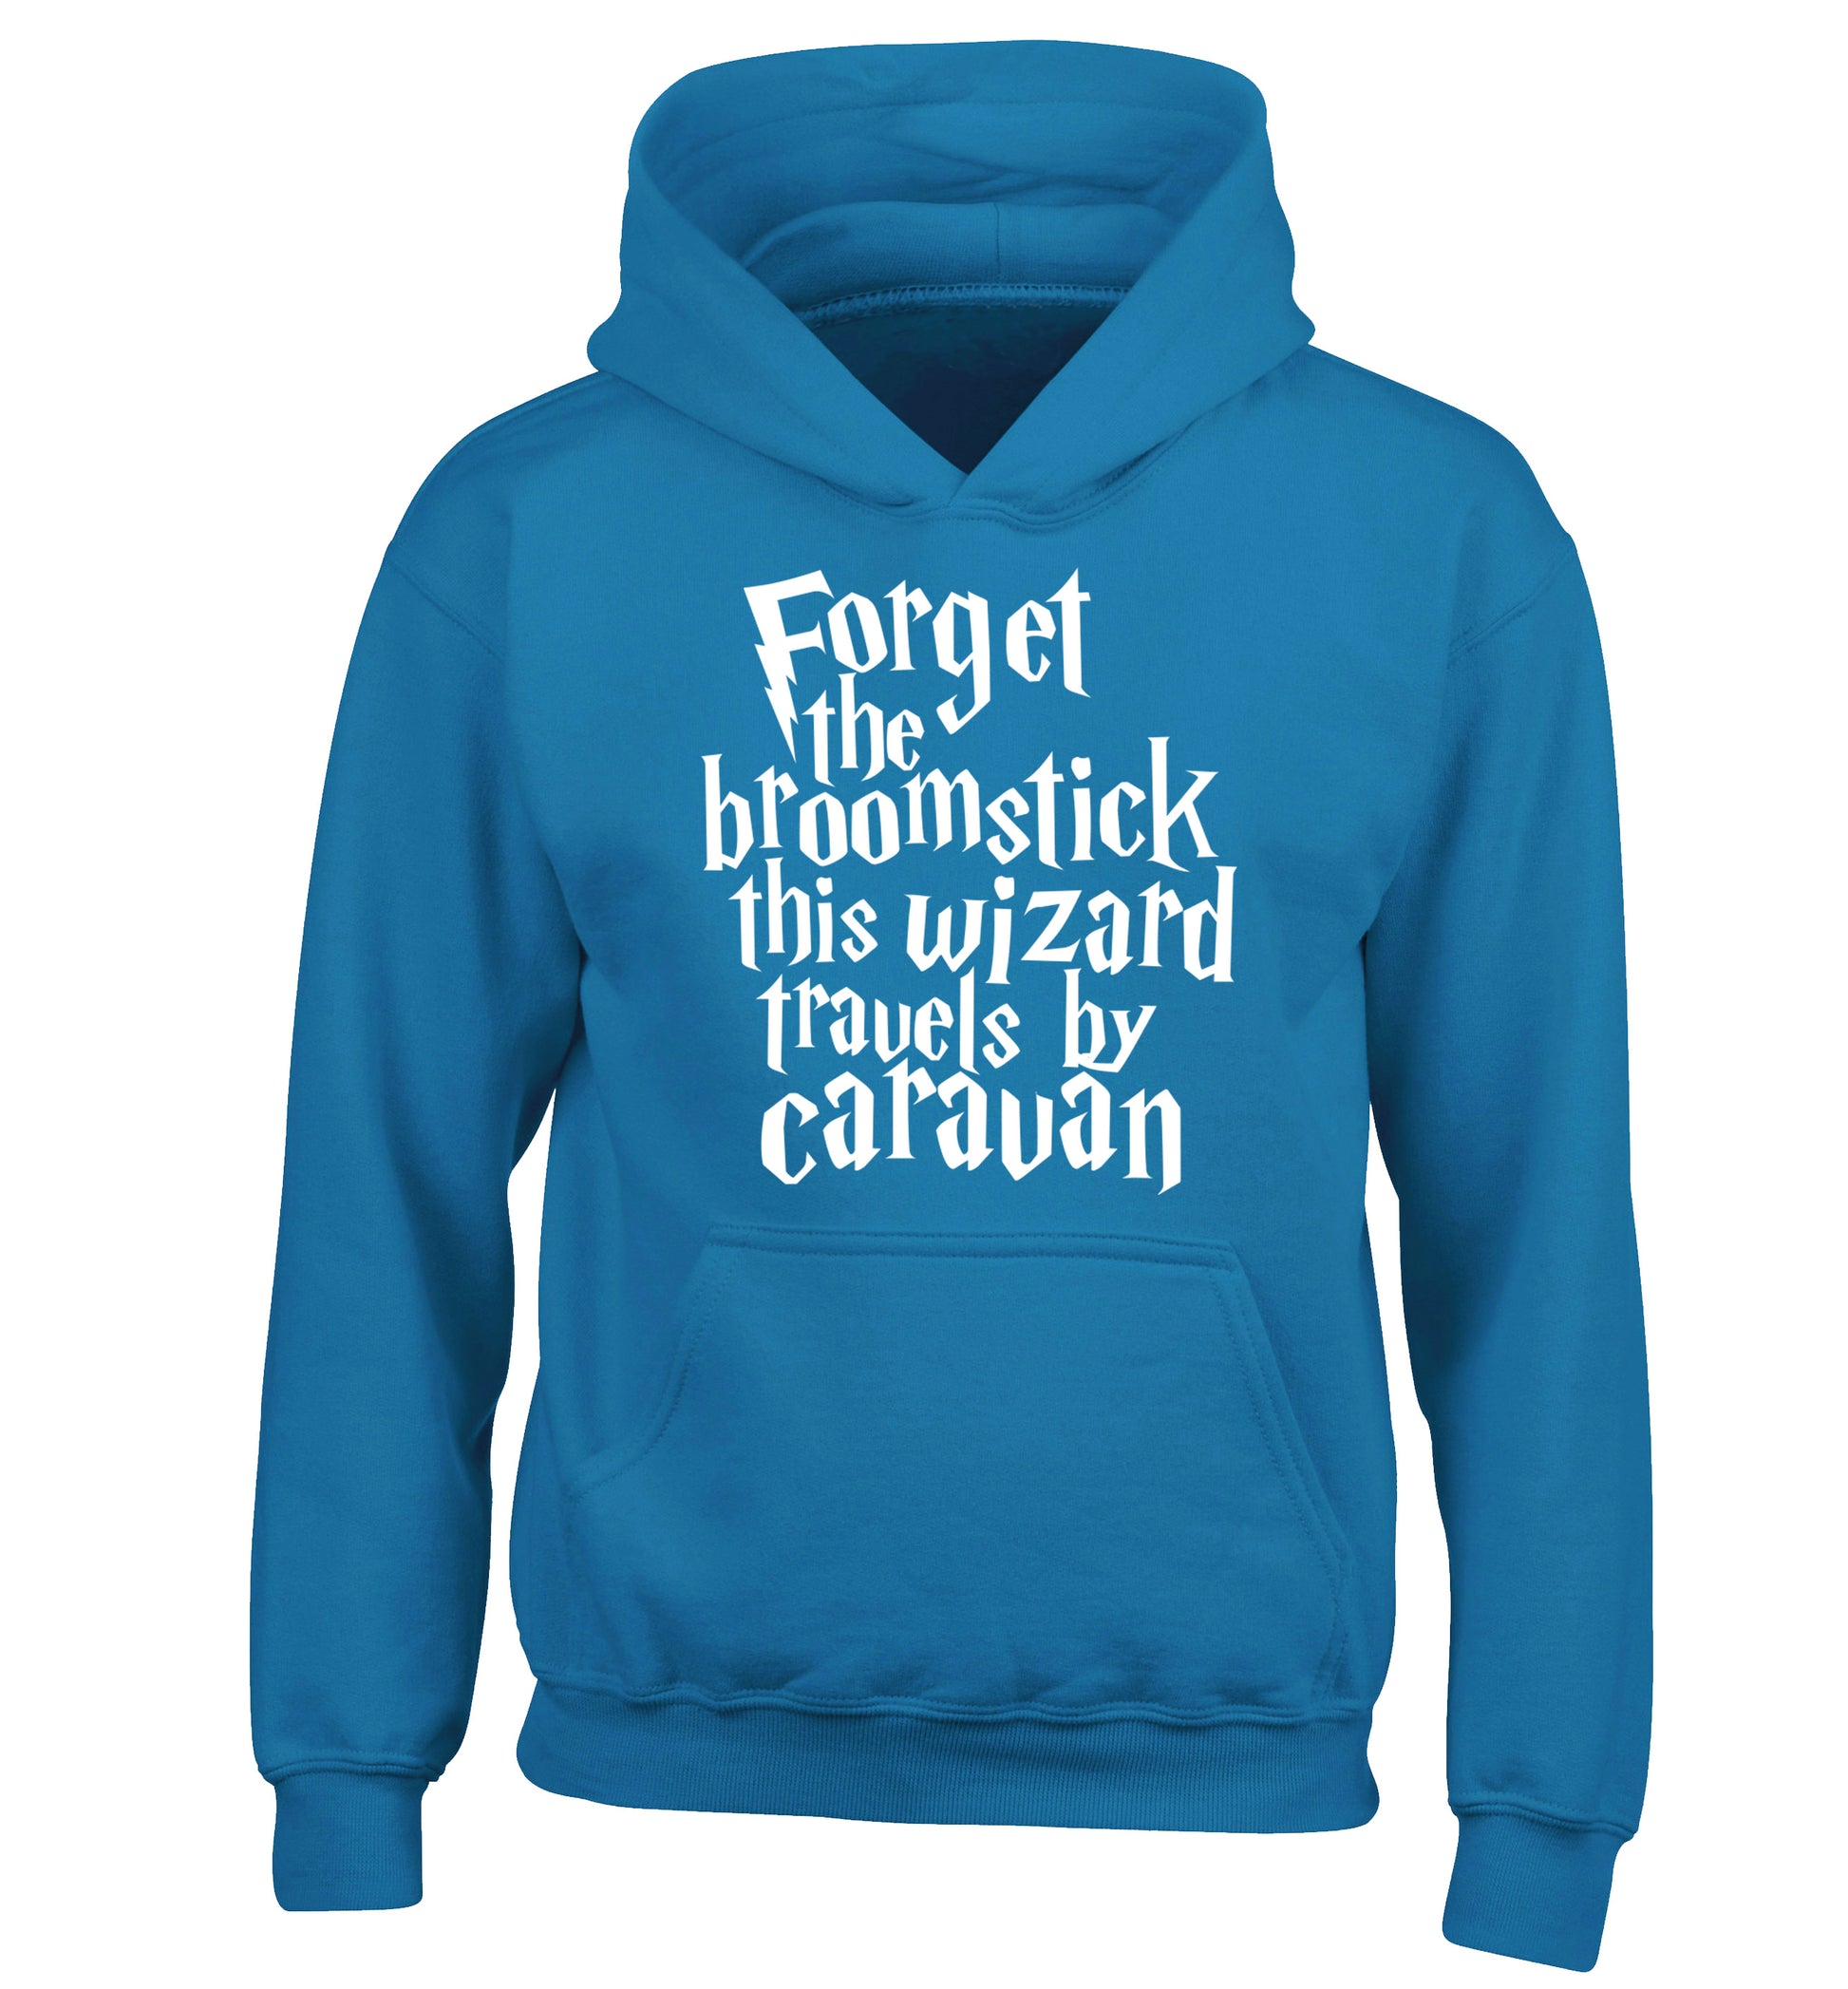 Forget the broomstick this wizard travels by caravan children's blue hoodie 12-14 Years